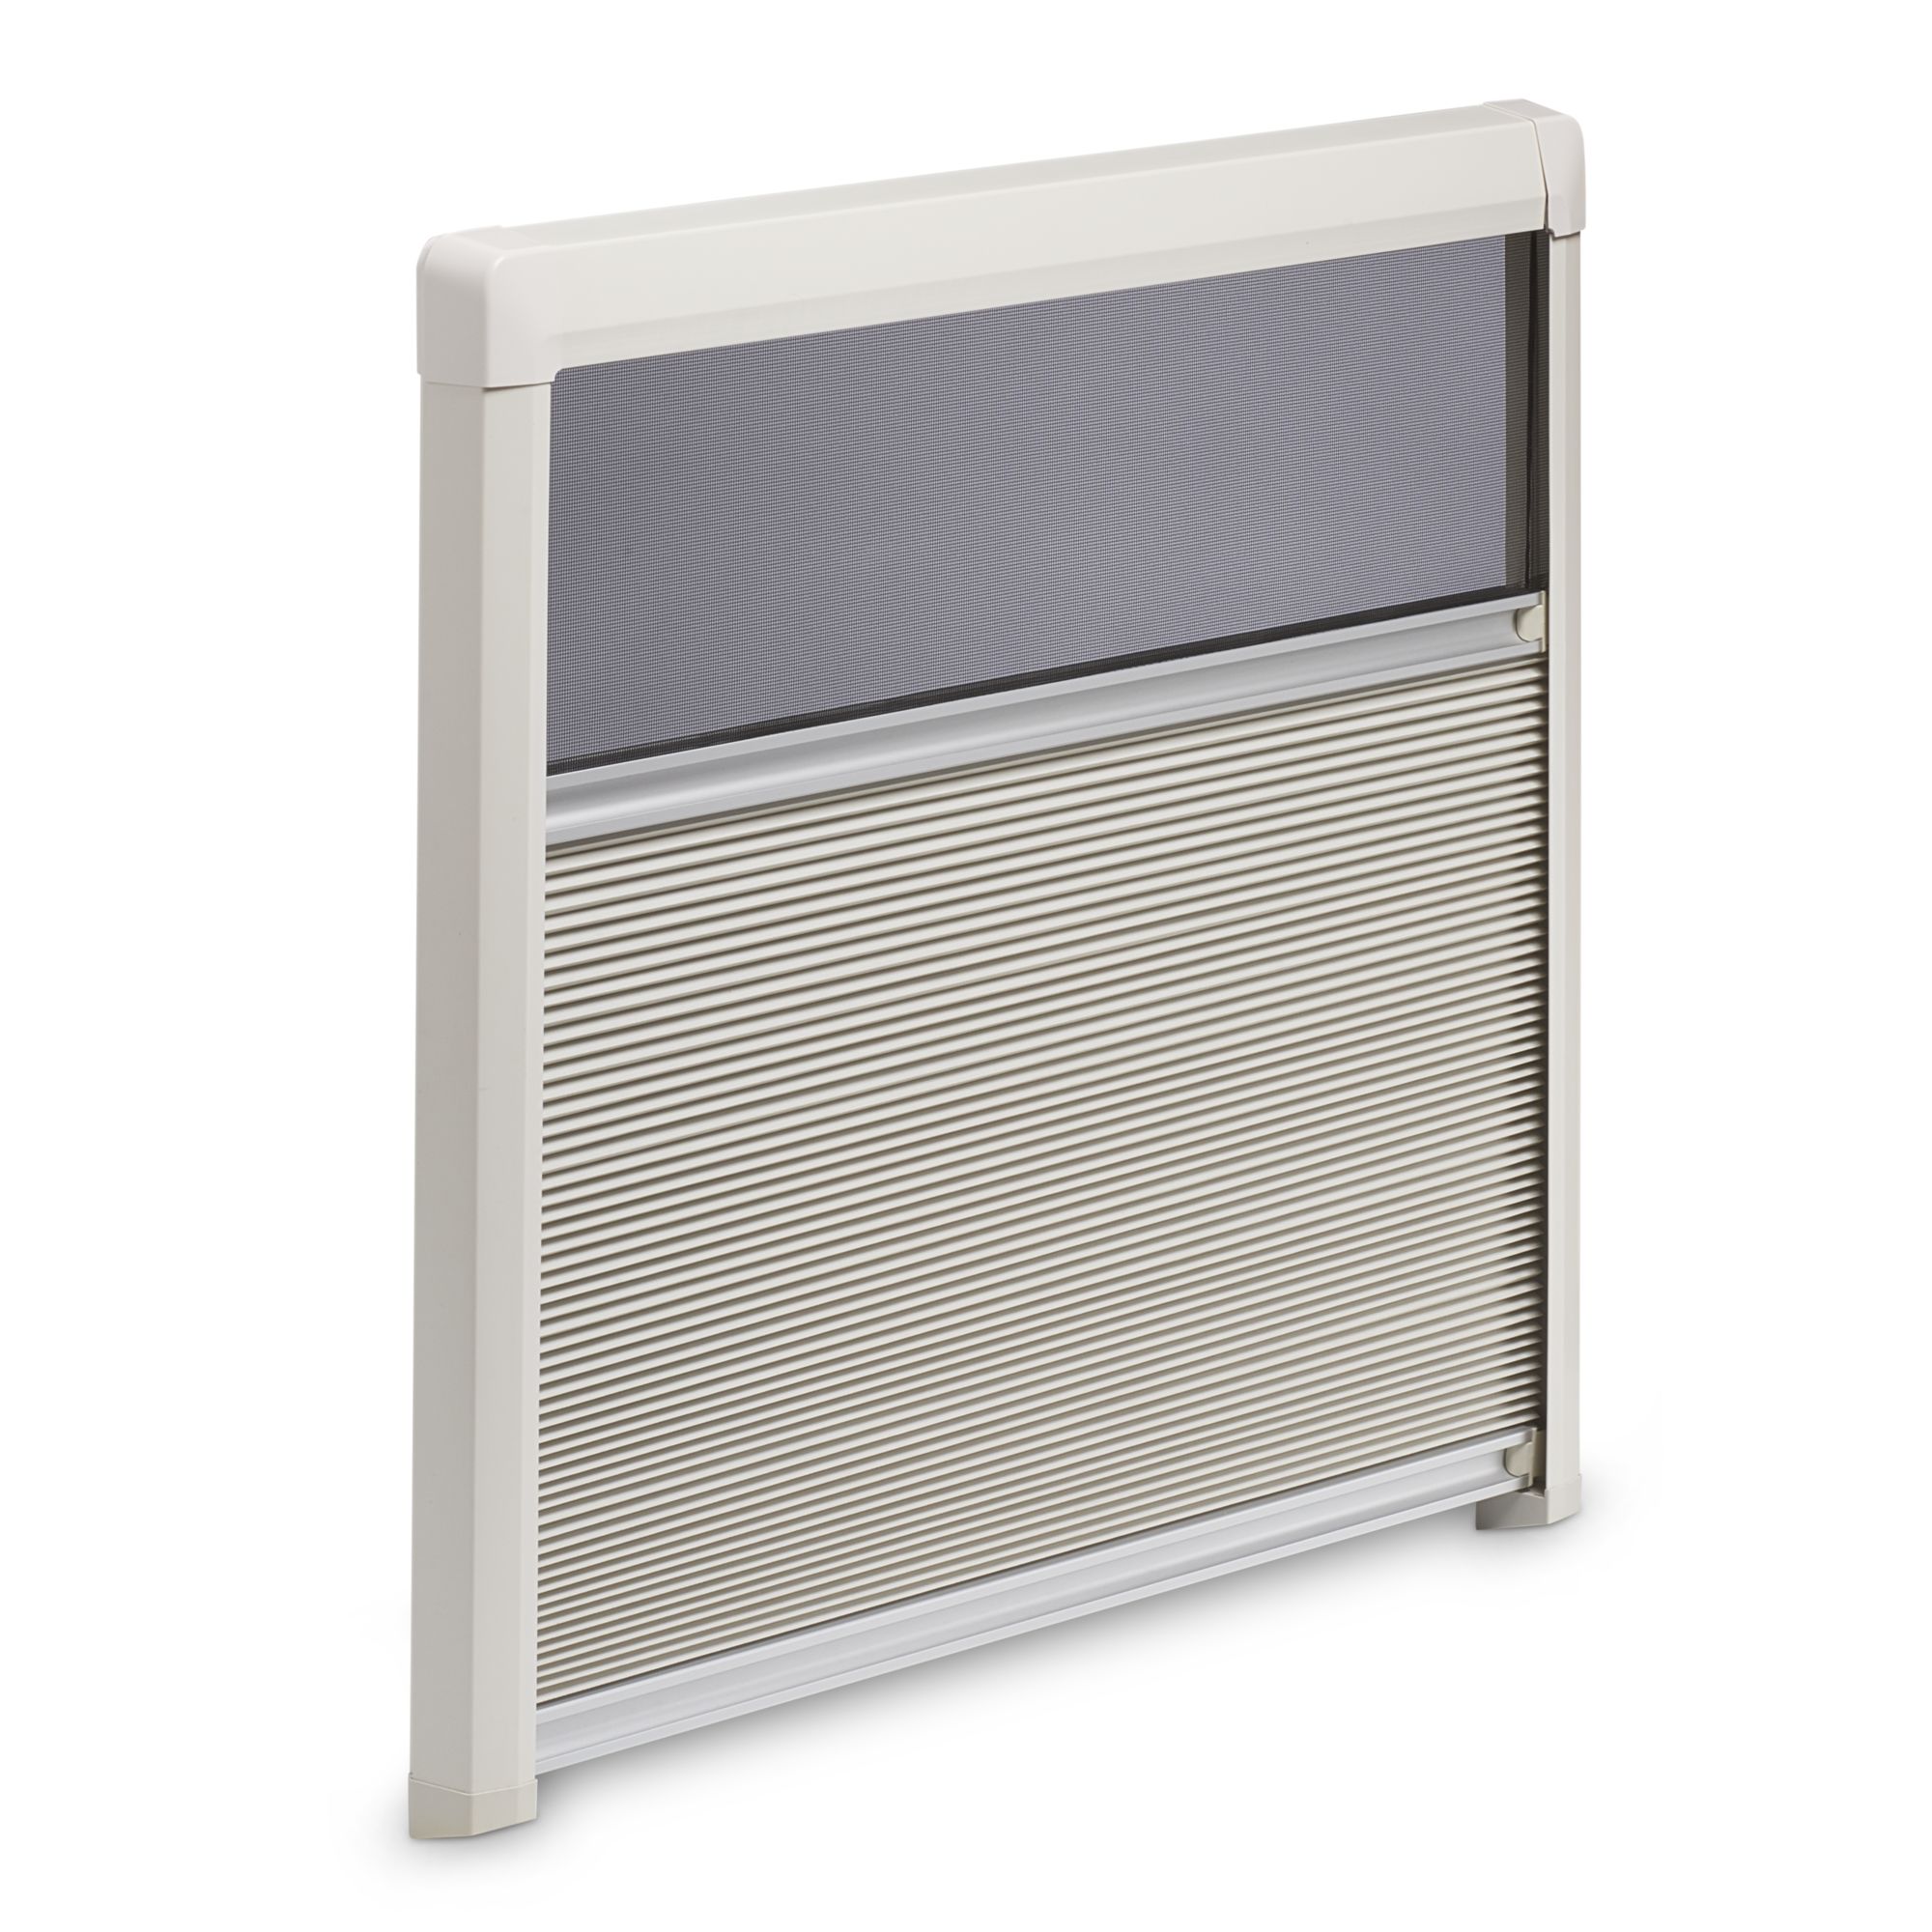 Dometic DB3H Roller Blind double-pleated, 635 x 700 mm, creme-white